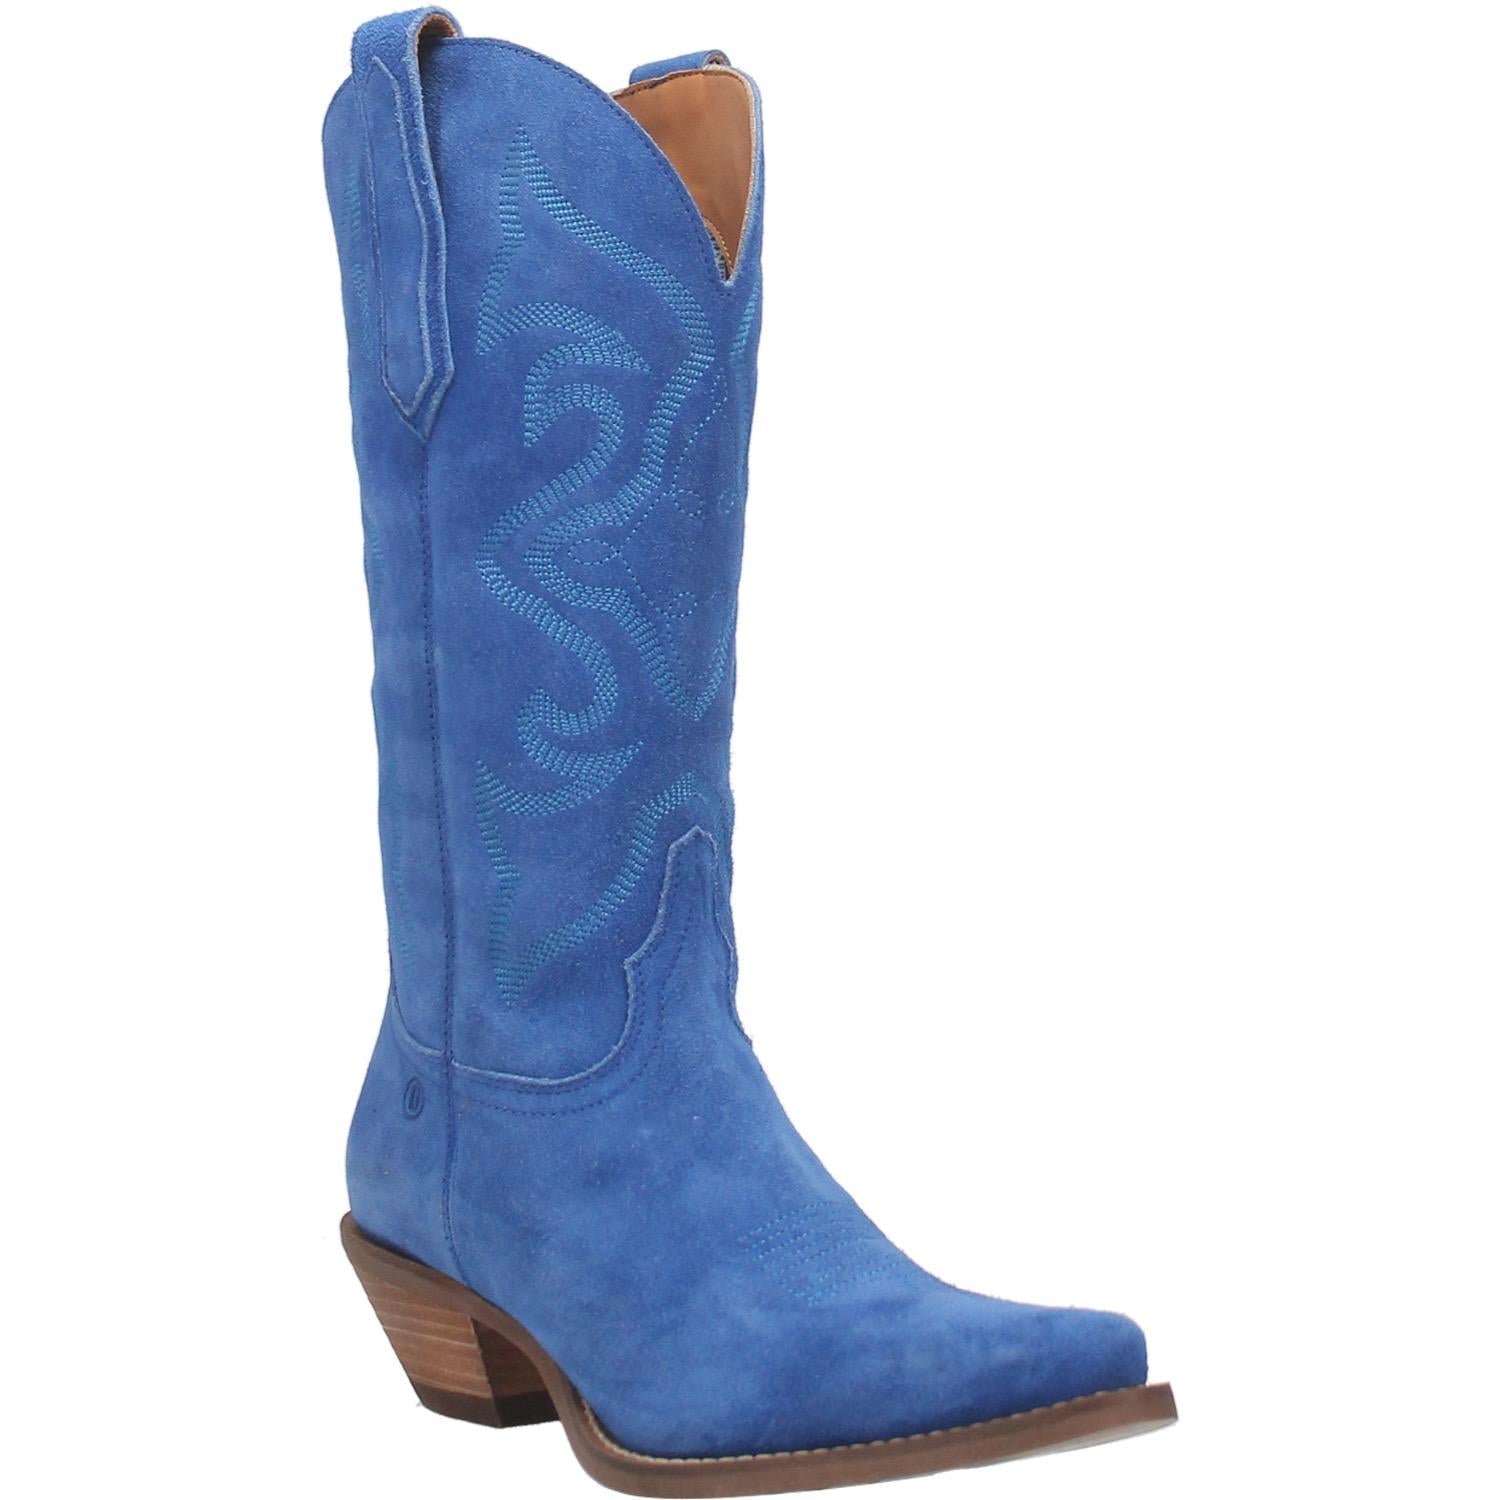 A blue mid calf length suede boot with a unique stitched pattern on the front, matching suede straps, a V cut on the top, and a small heel. Item is pictured on a plain white background